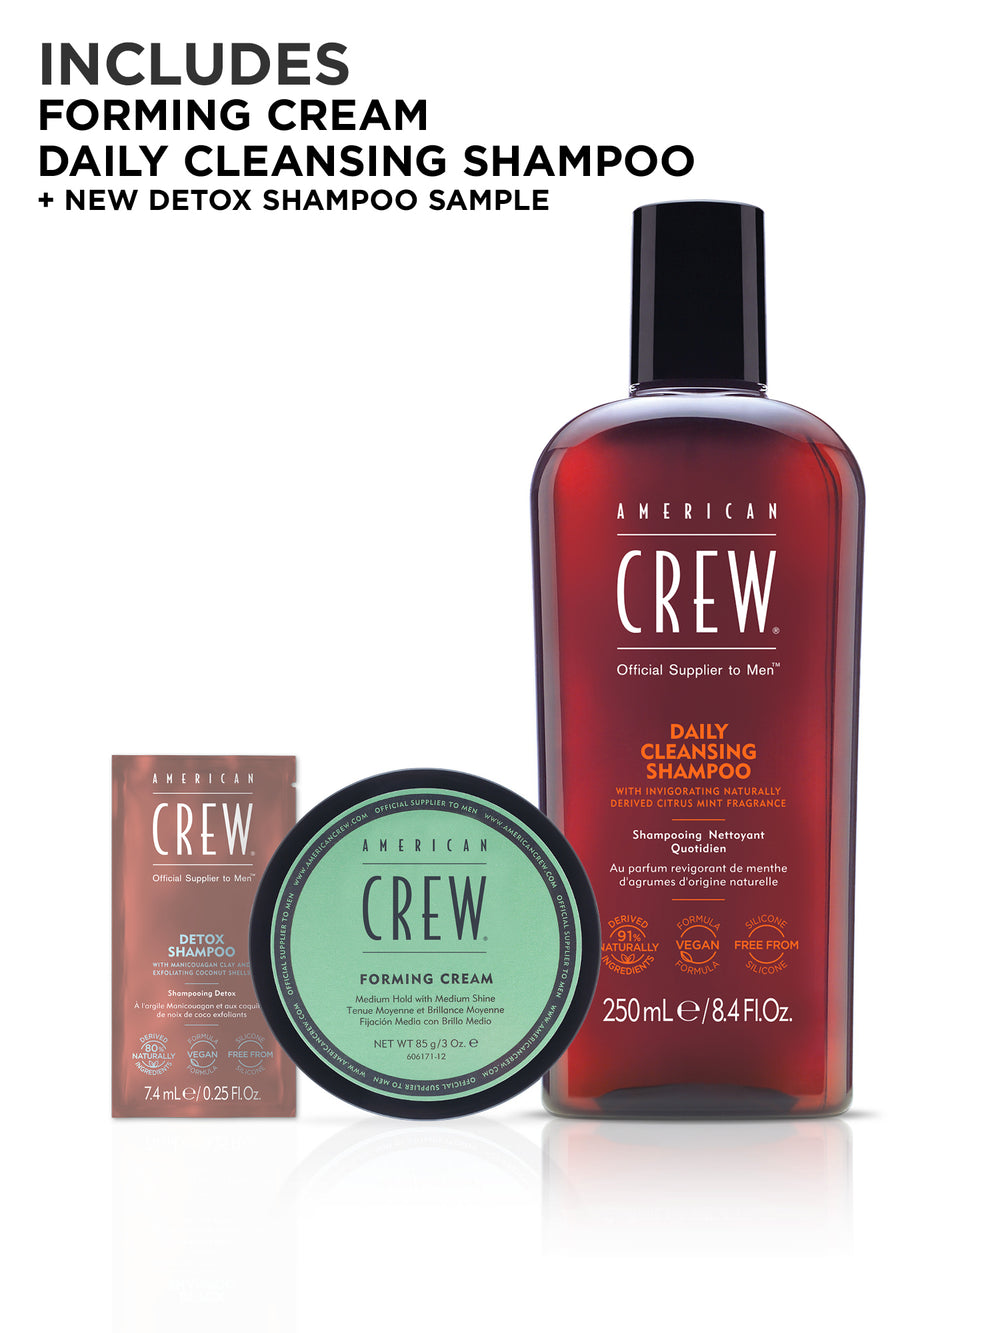 includes forming cream, daily cleansing shampoo and detox shampoo sample